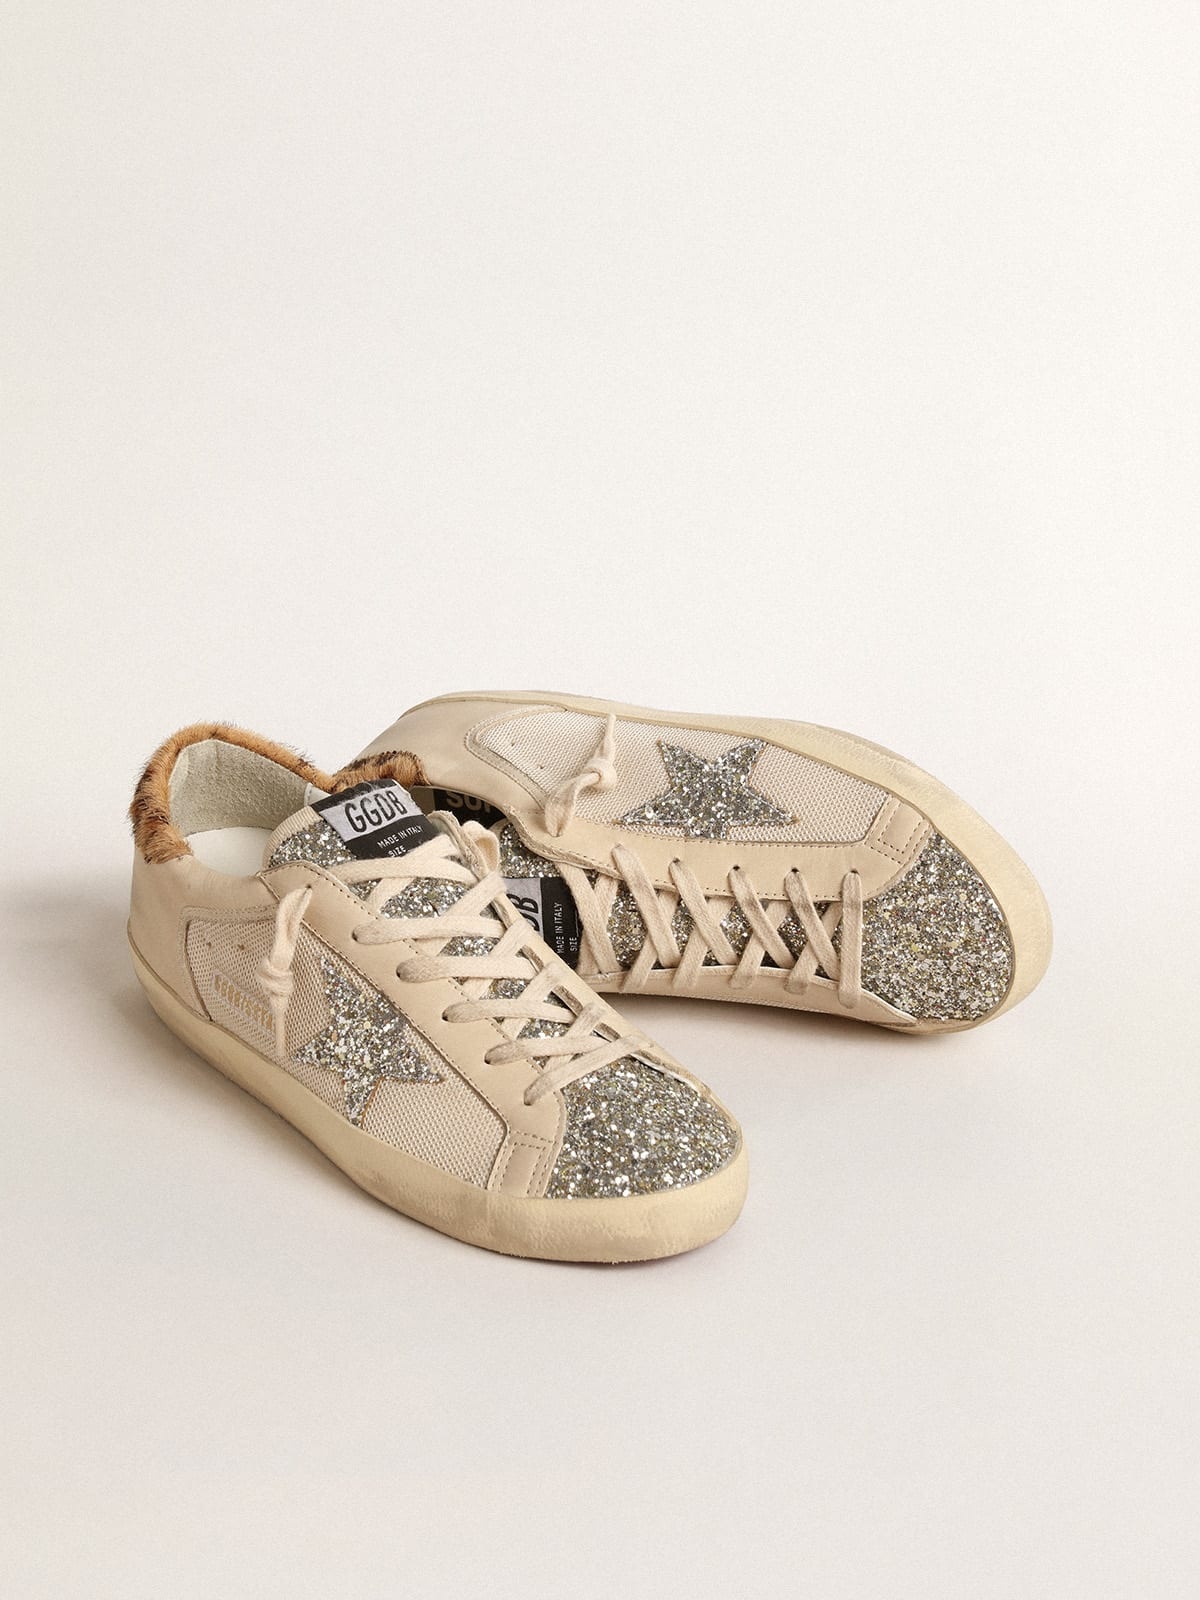 20mm Super-star Mesh & Leather Sneakers